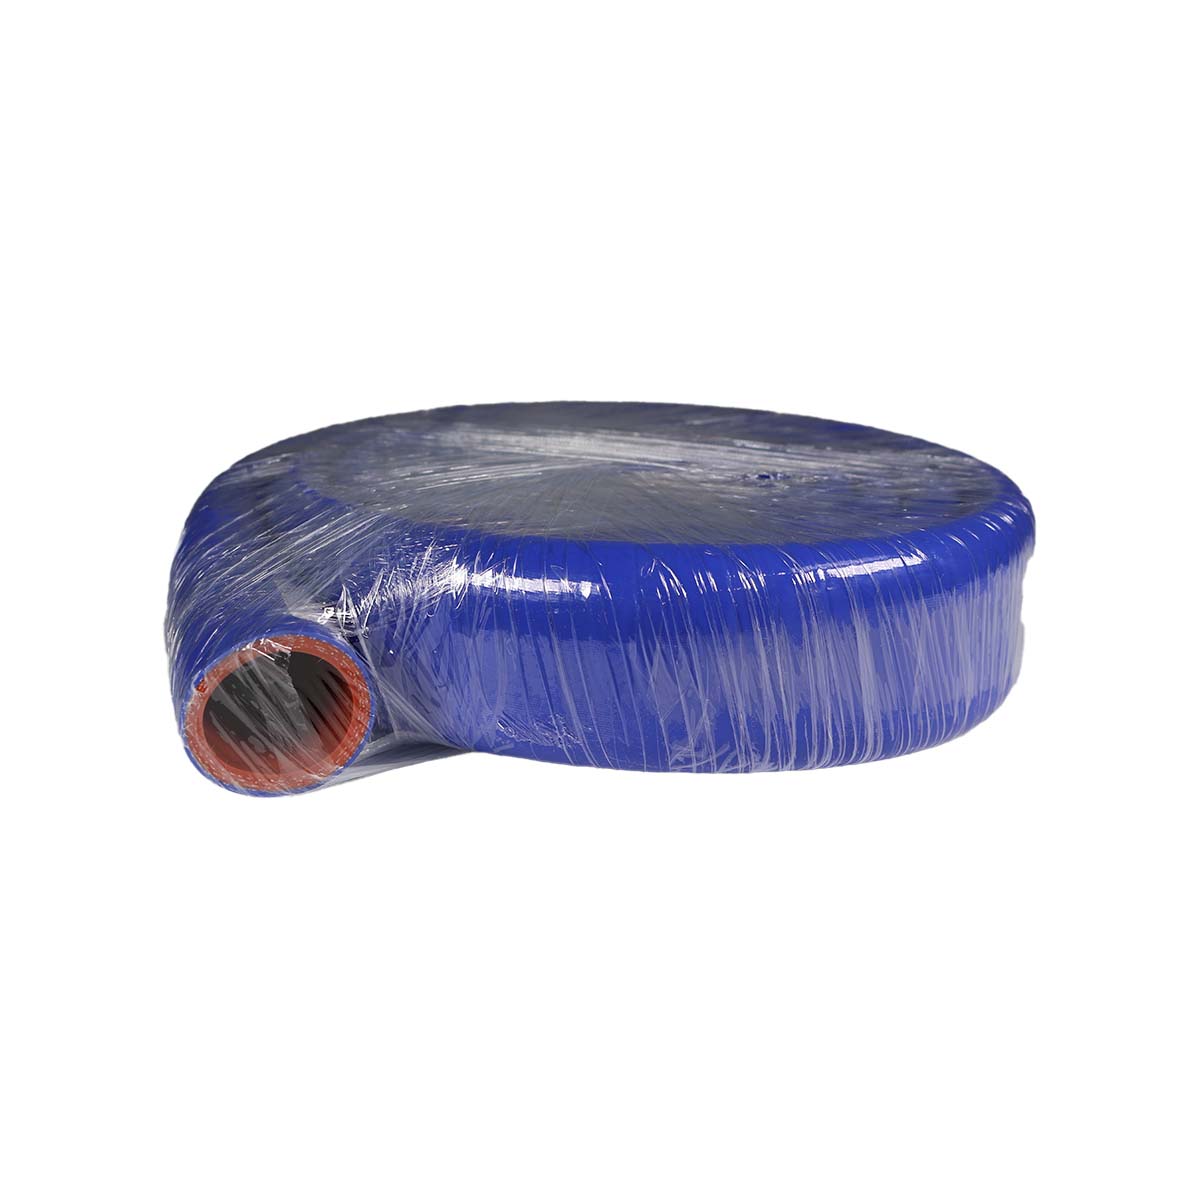 SILICONE BLOW BY HOSE (BLUE) - 1.250 ID (6' LENGTH)